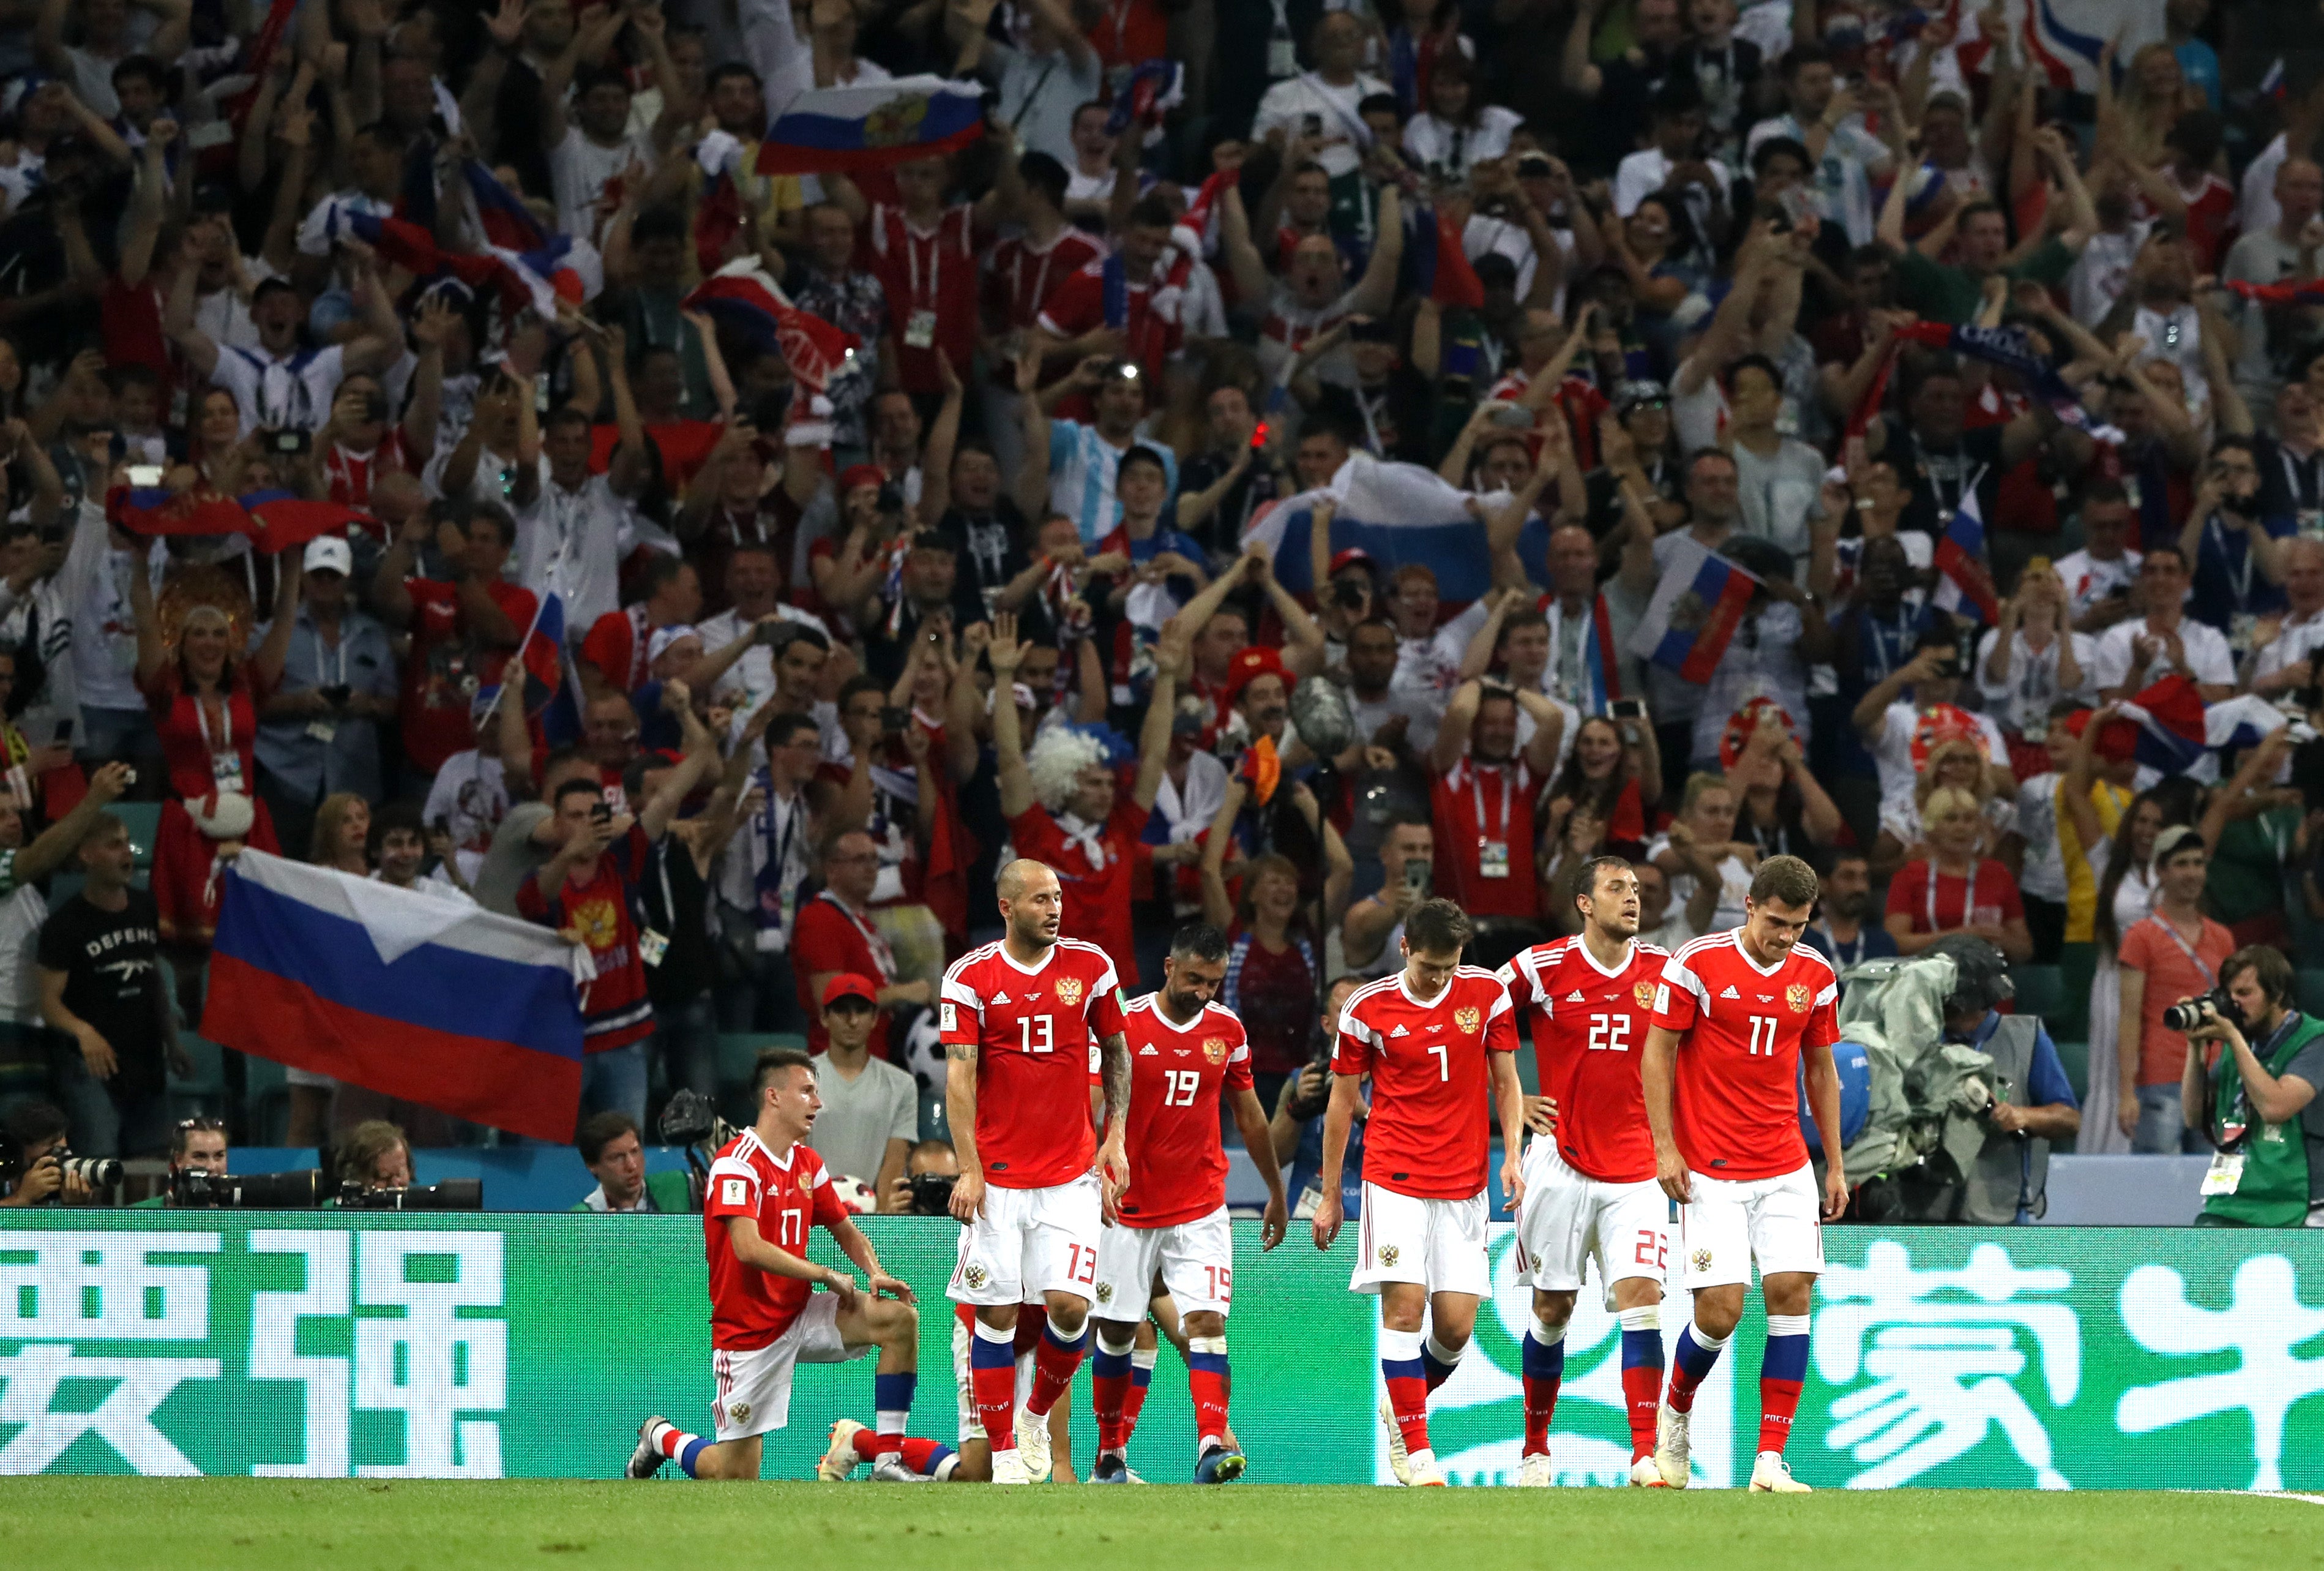 Denis Cheryshev celebrates at the 2018 Fifa World Cup, Russia’s last appearance at a major tournament